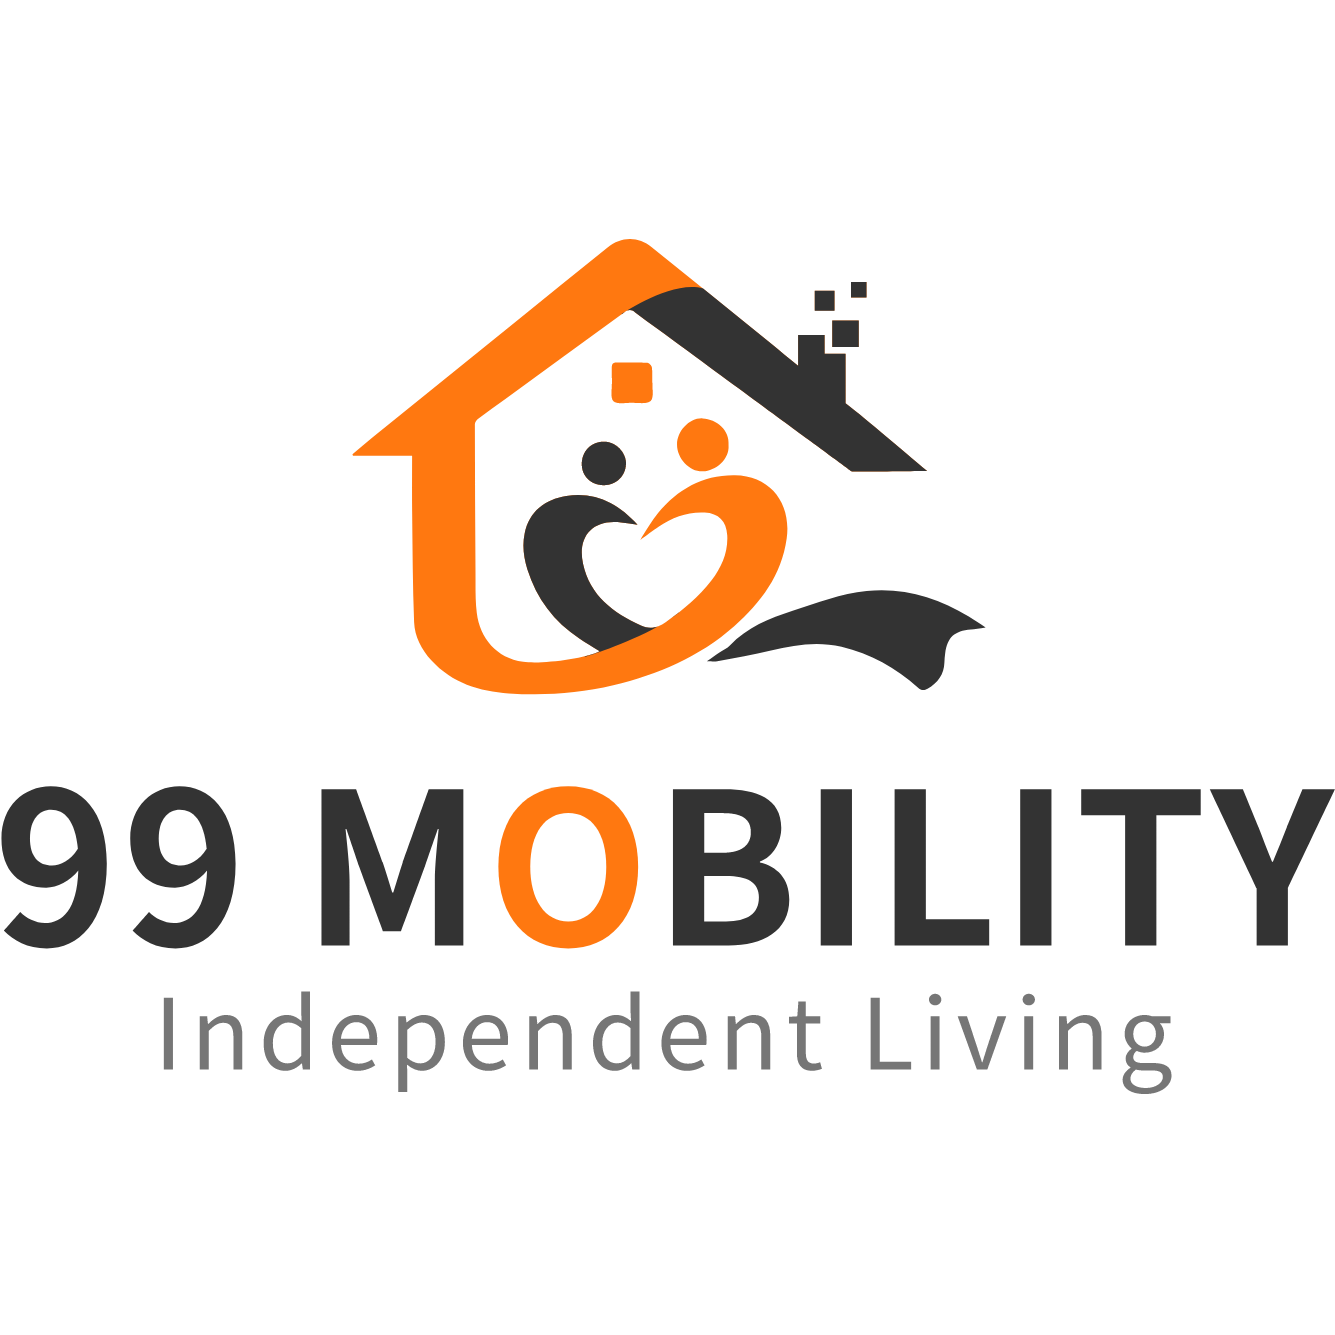 Load video: 99Mobility - You local specialist for independent living equipment